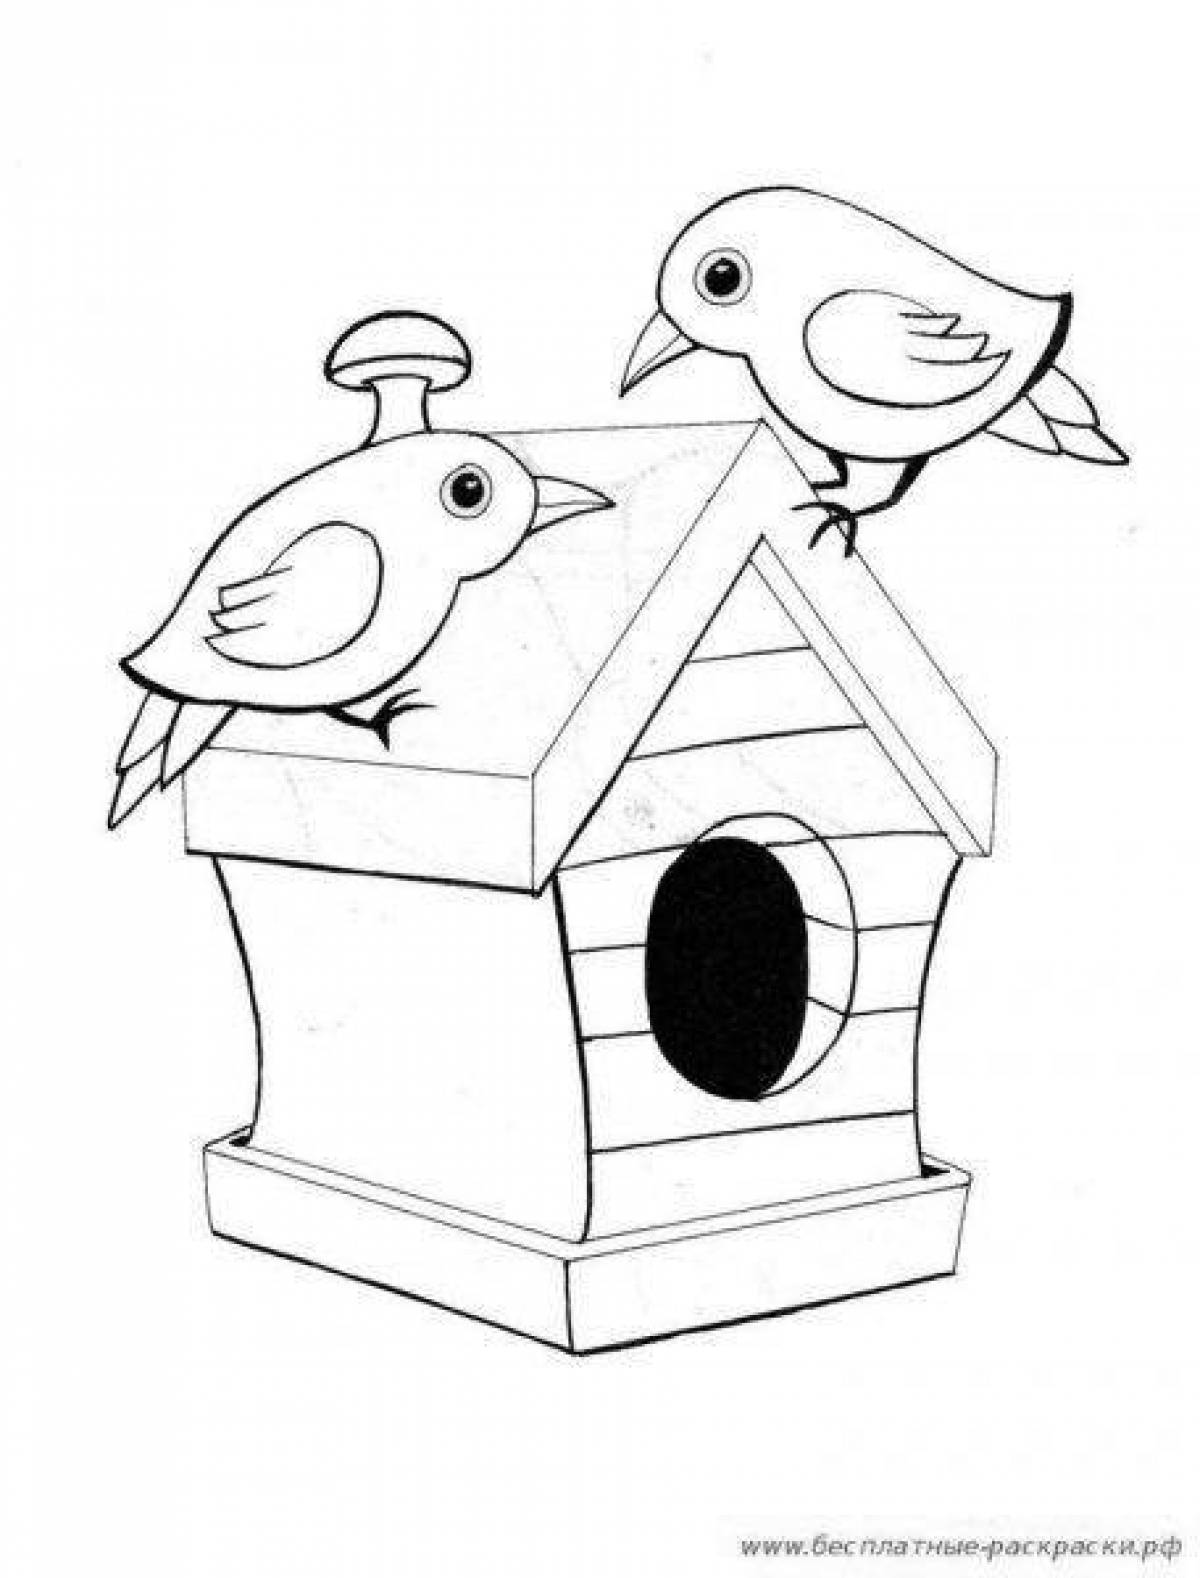 Colorful birdhouse coloring book